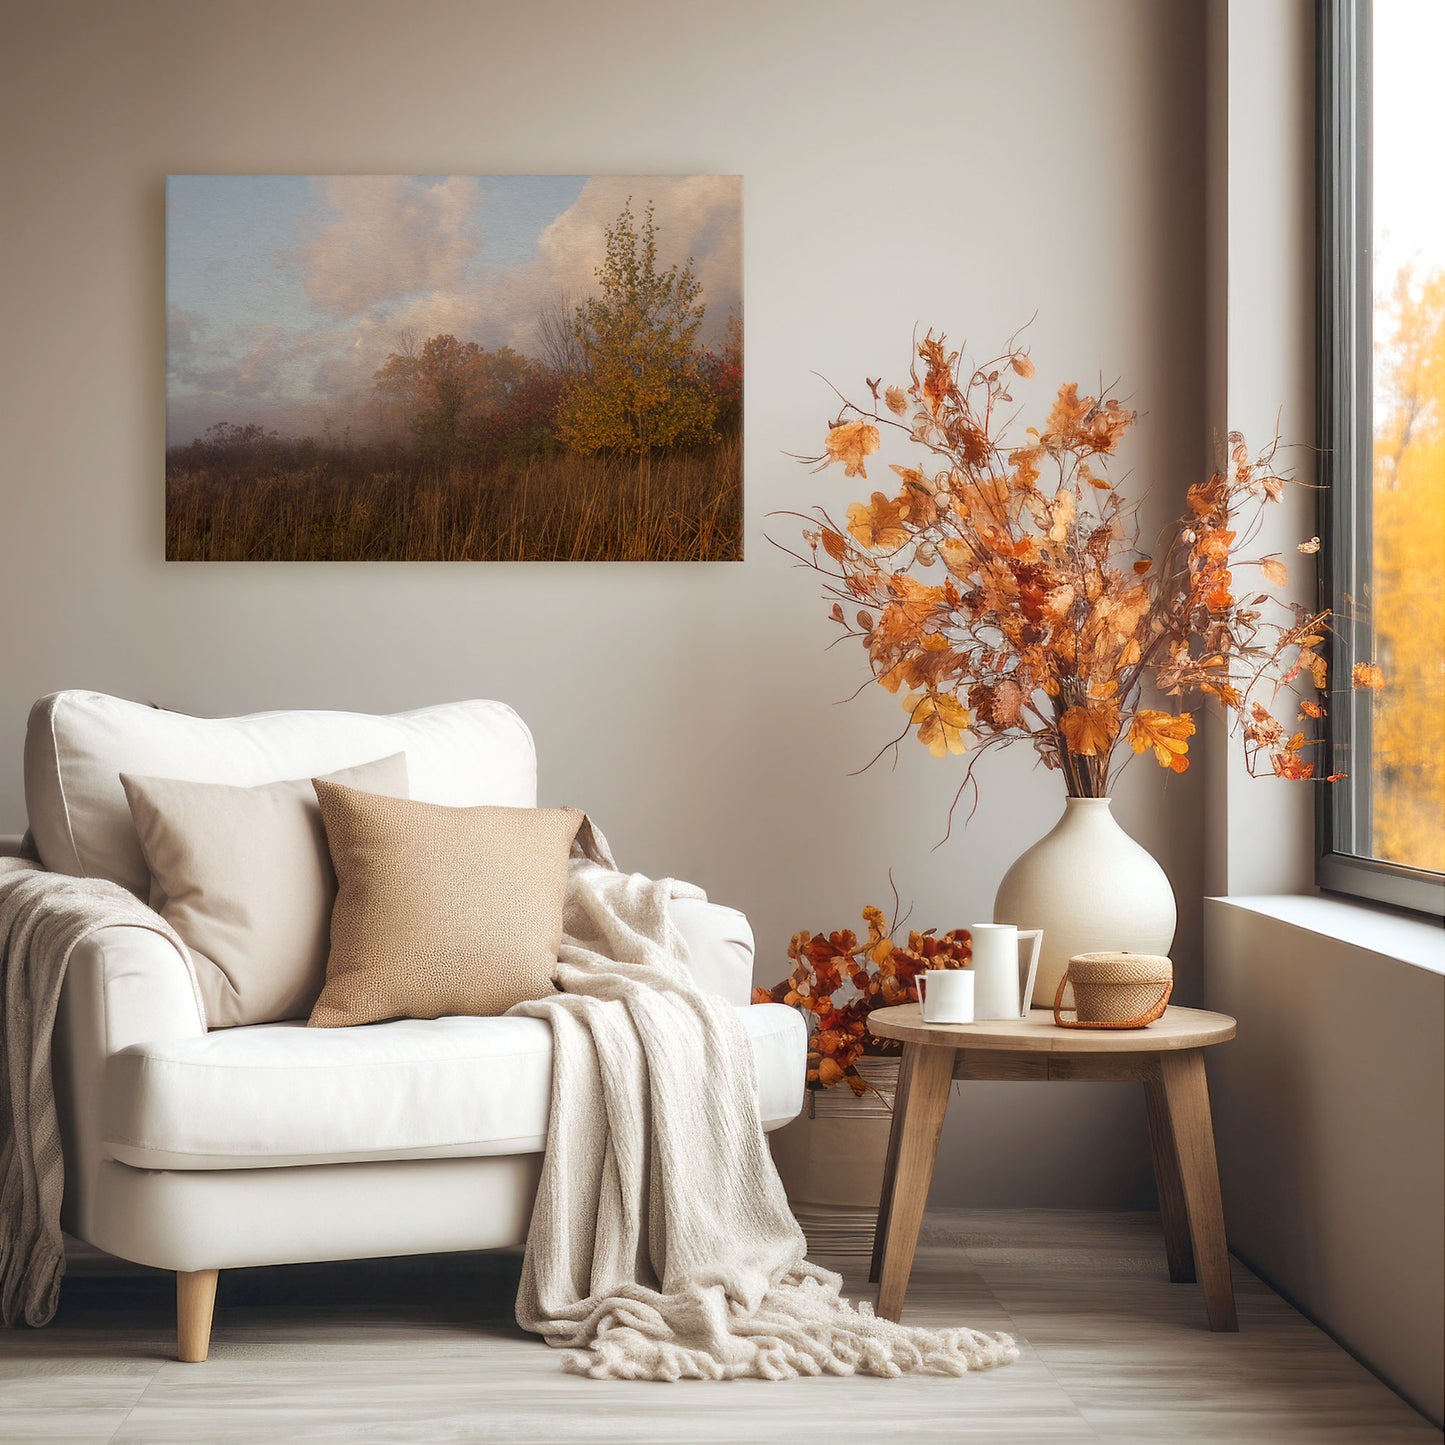 Perfectly aligned with modern farmhouse aesthetics, the 'Foggy Fall Prairie' artwork is an autumnal image that elevates nature photography into enthralling wall decor.